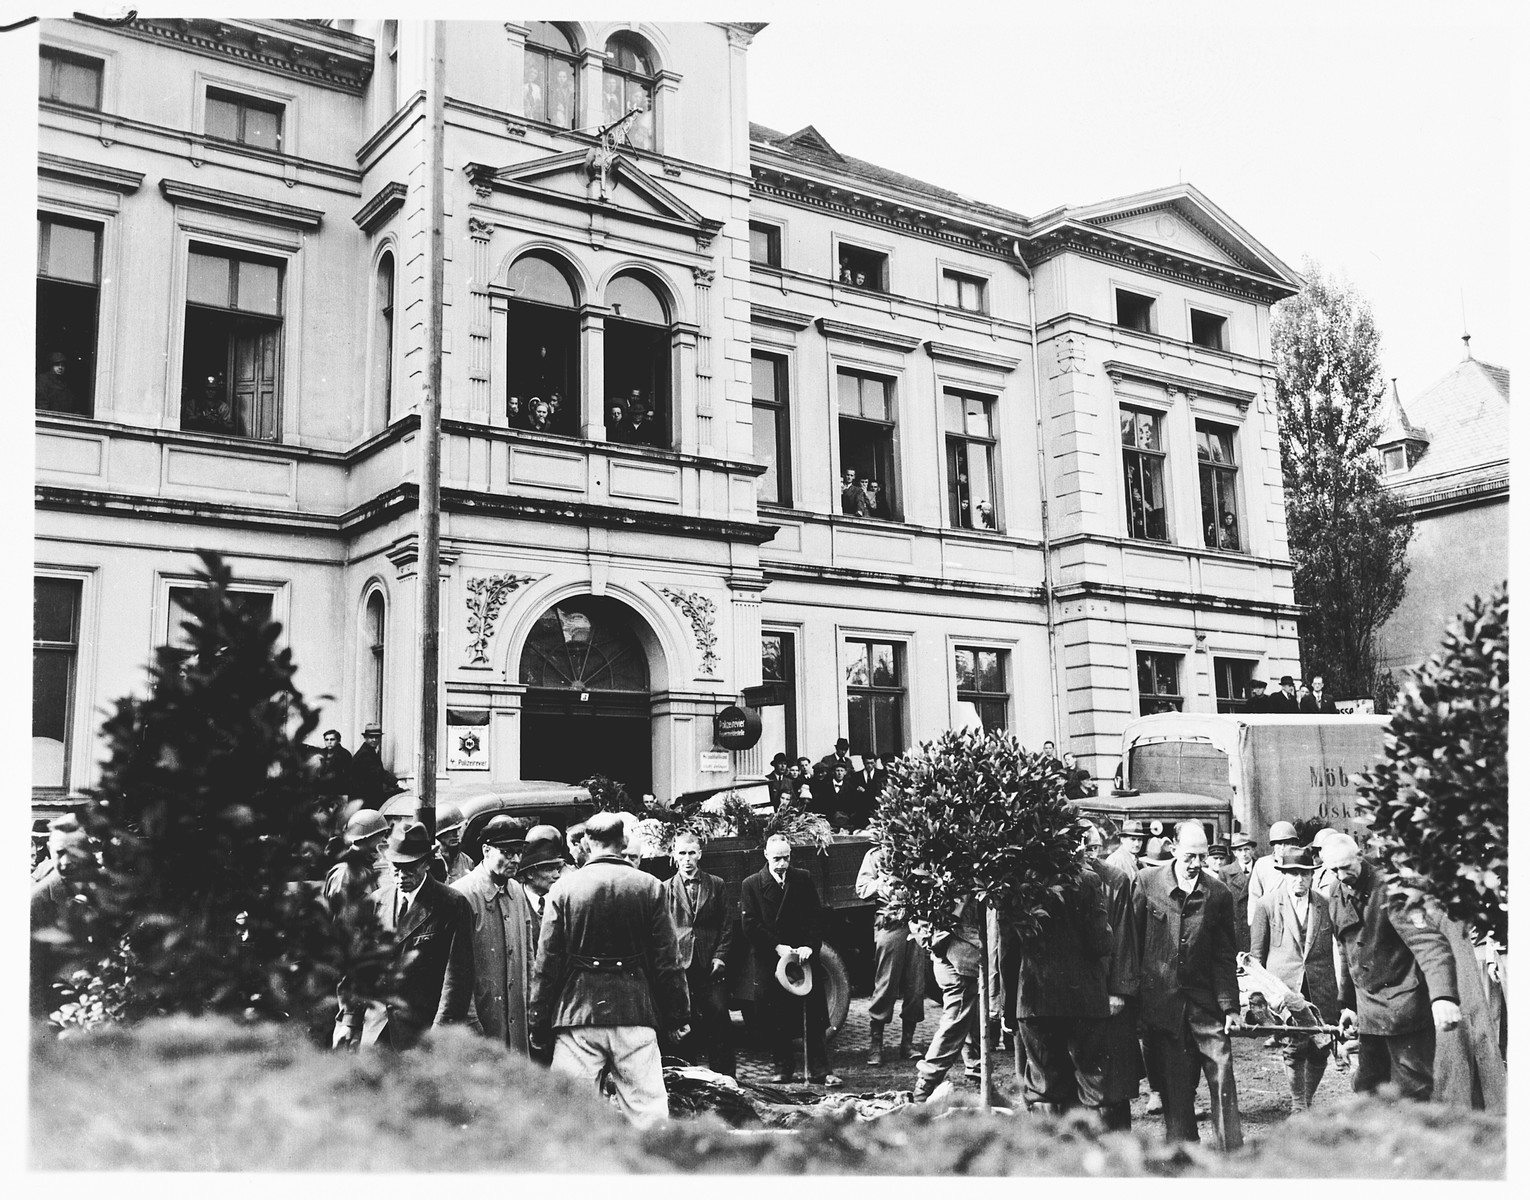 Under the direction of American soldiers, German civilians rebury the bodies of 71 political prisoners, exhumed from a mass grave near Solingen-Ohligs, in front of the city hall.  

The victims, most of whom were taken from Luettringhausen prison, were shot and buried by the Gestapo following orders to eliminate all Reich enemies just before the end of the war.